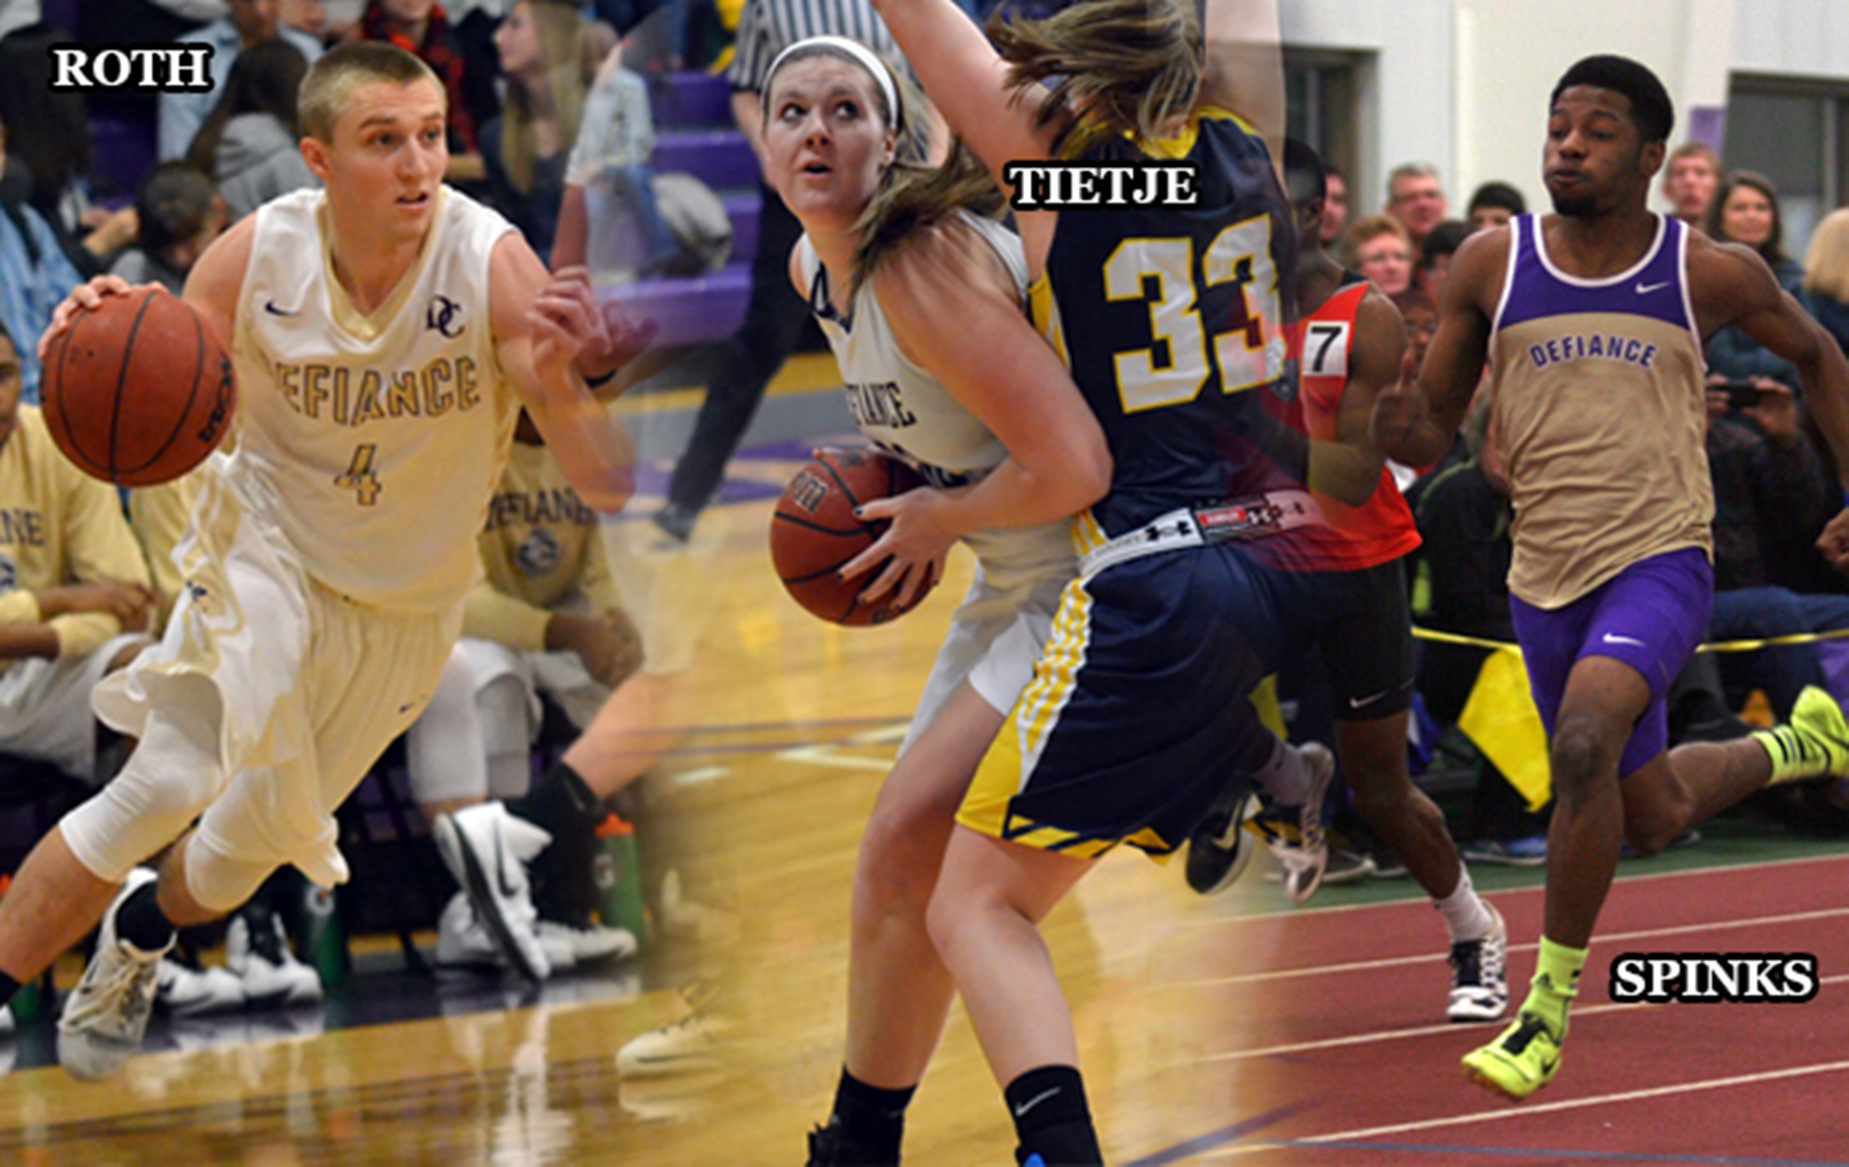 Roth, Tietje, and Spinks Named HCAC Players of the Week